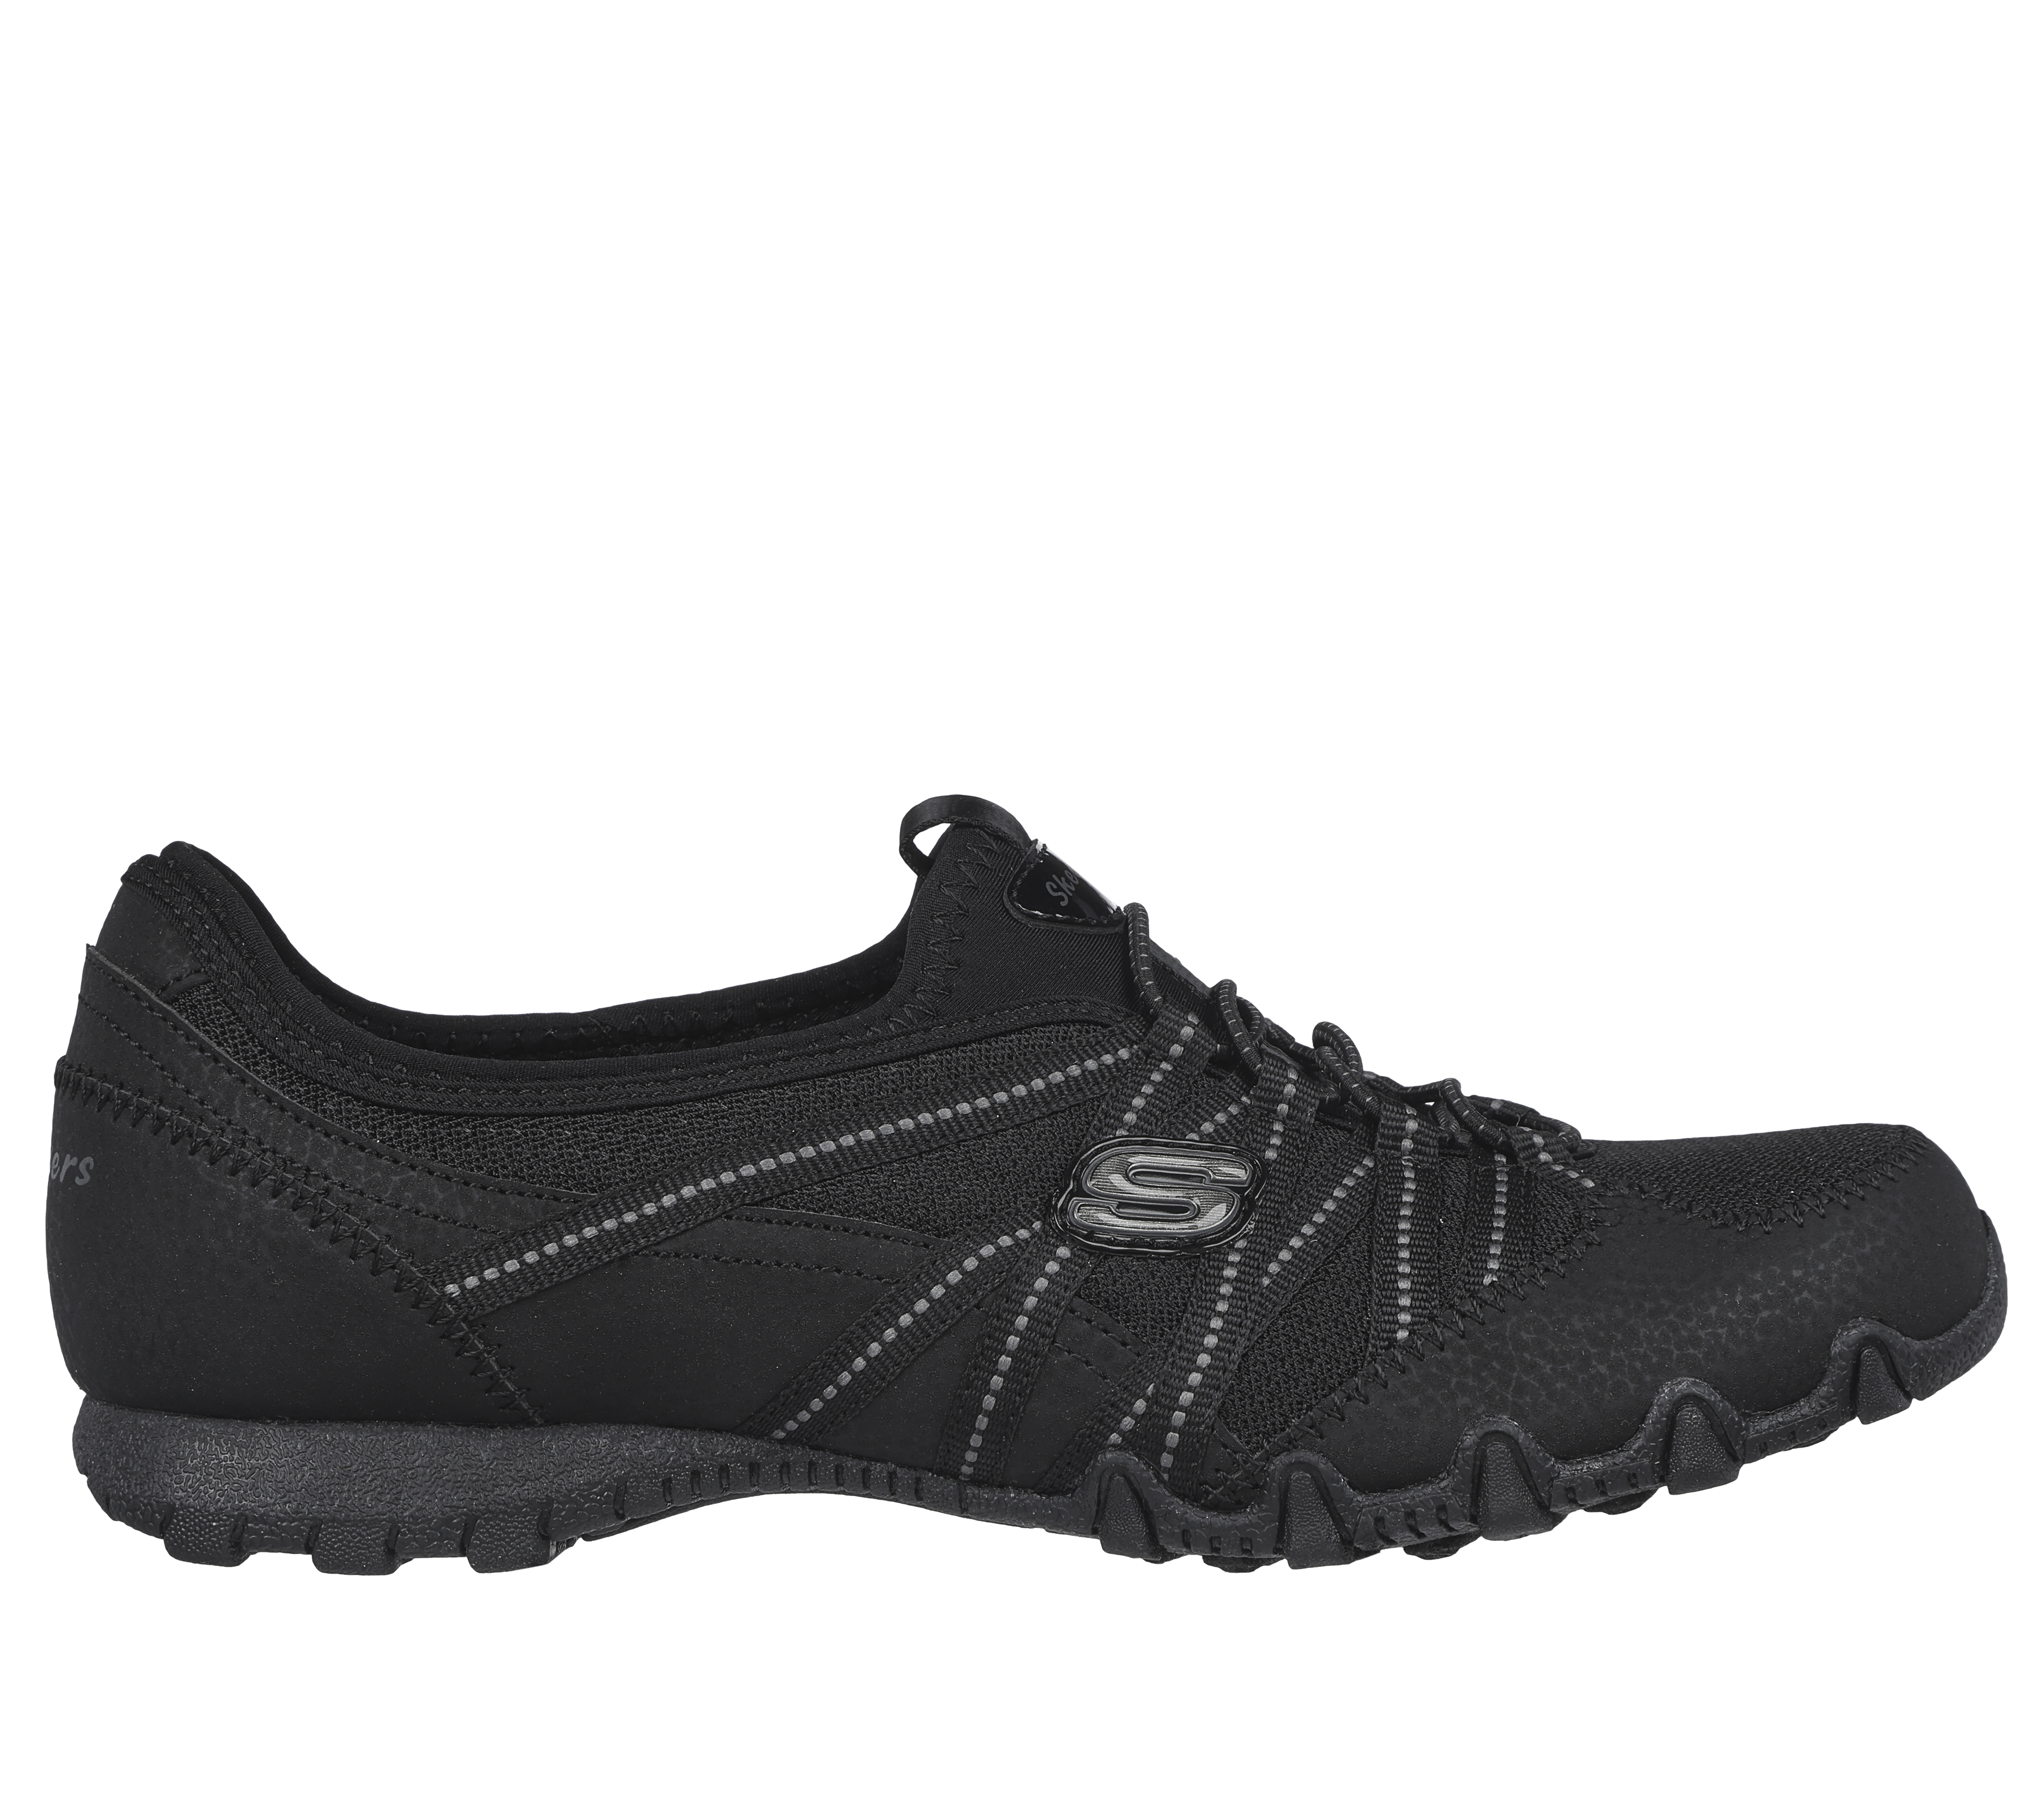 Knurre Panorama Labe Relaxed Fit: Bikers Lite - Relive | SKECHERS